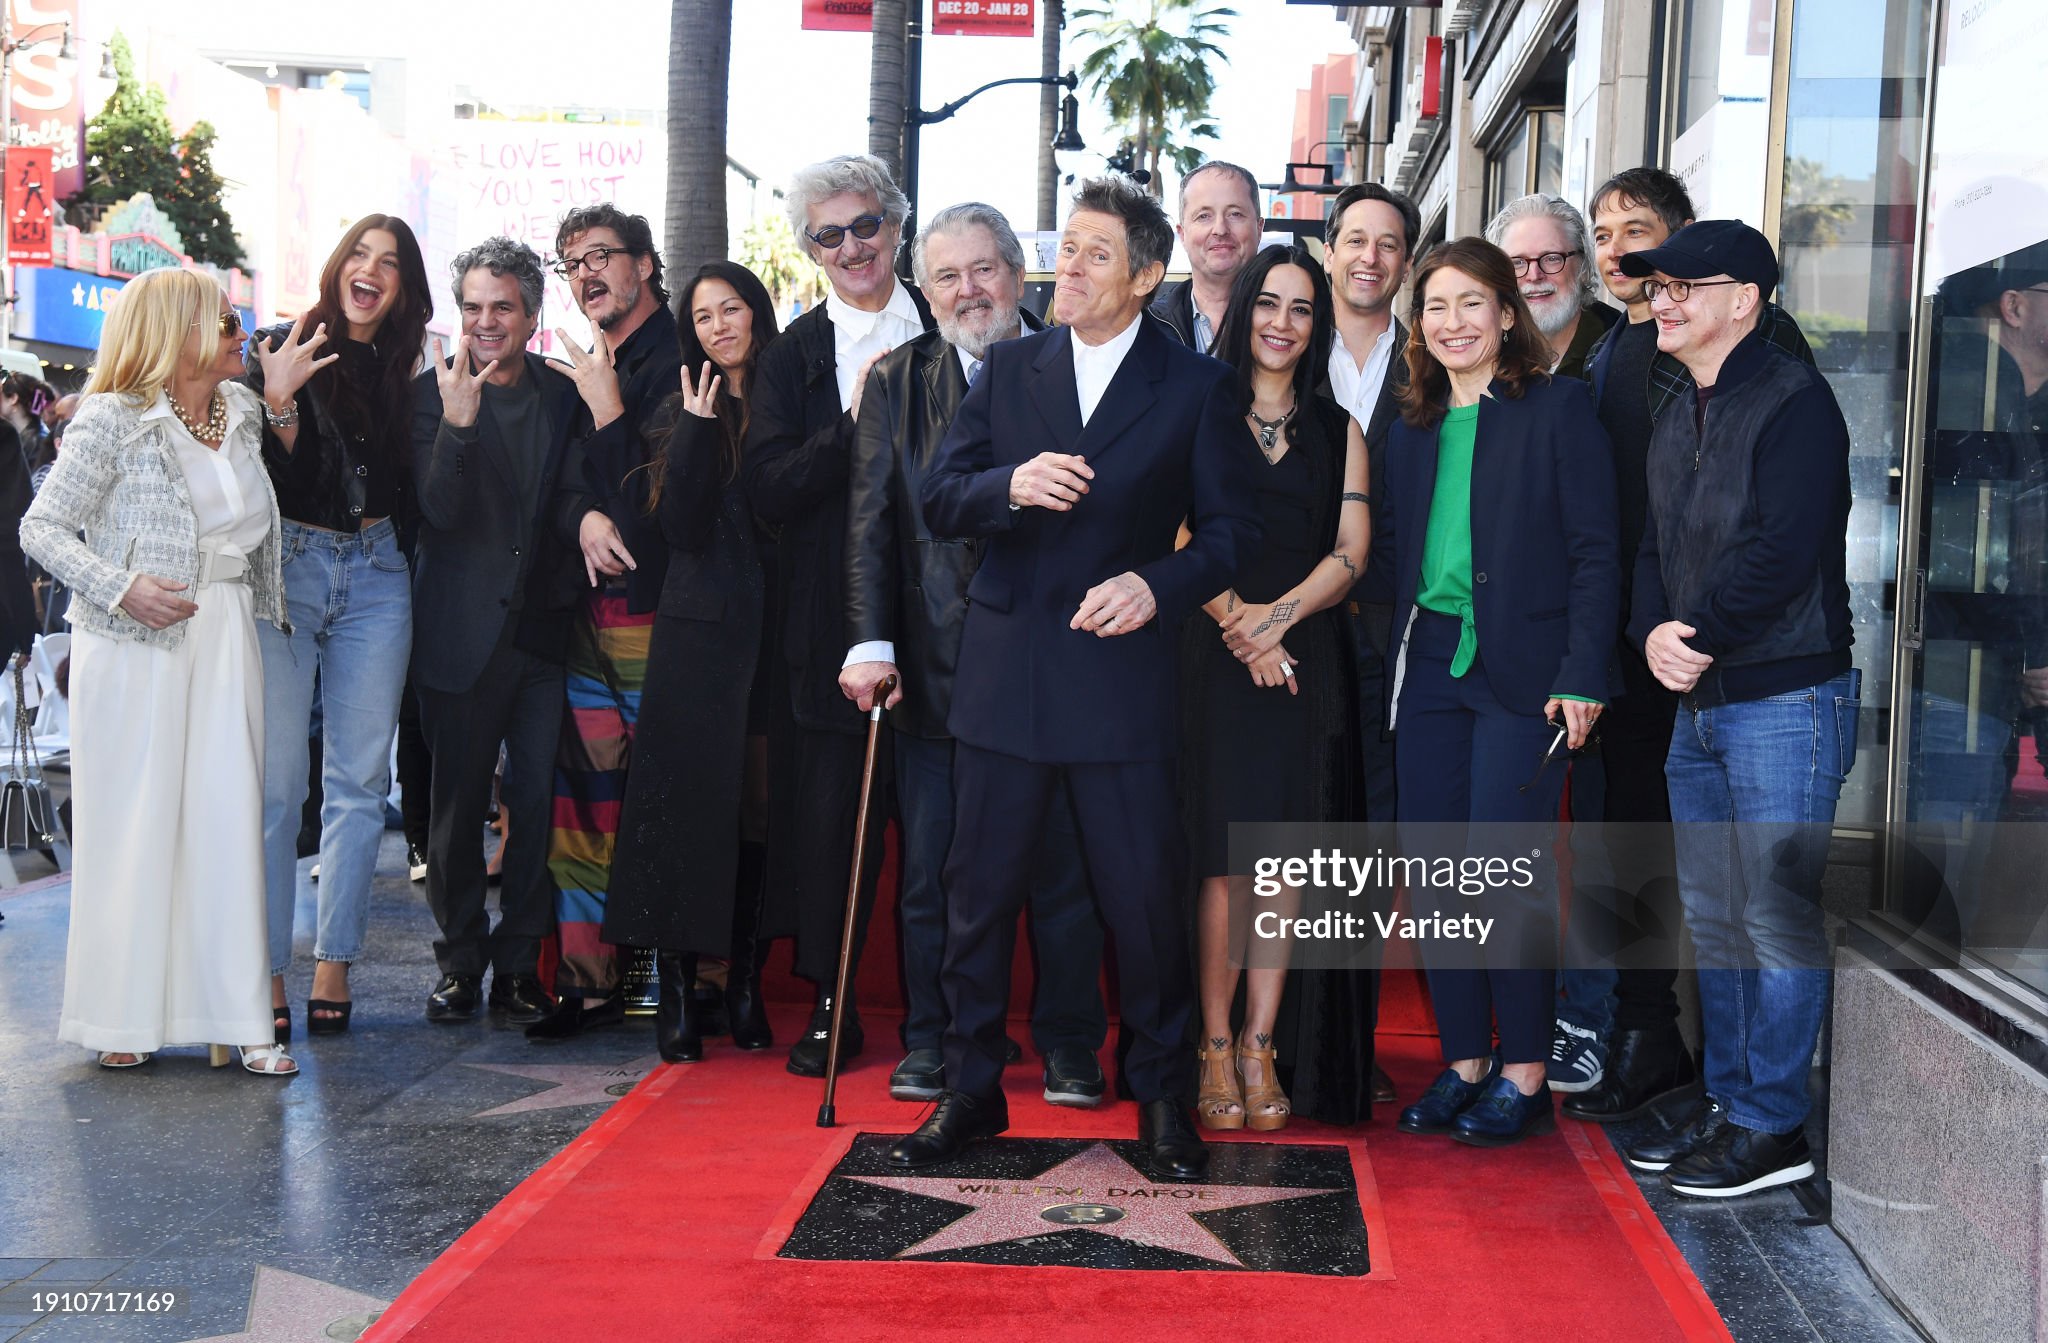 willem-dafoe-honored-with-star-on-the-hollywood-walk-of-fame.jpg